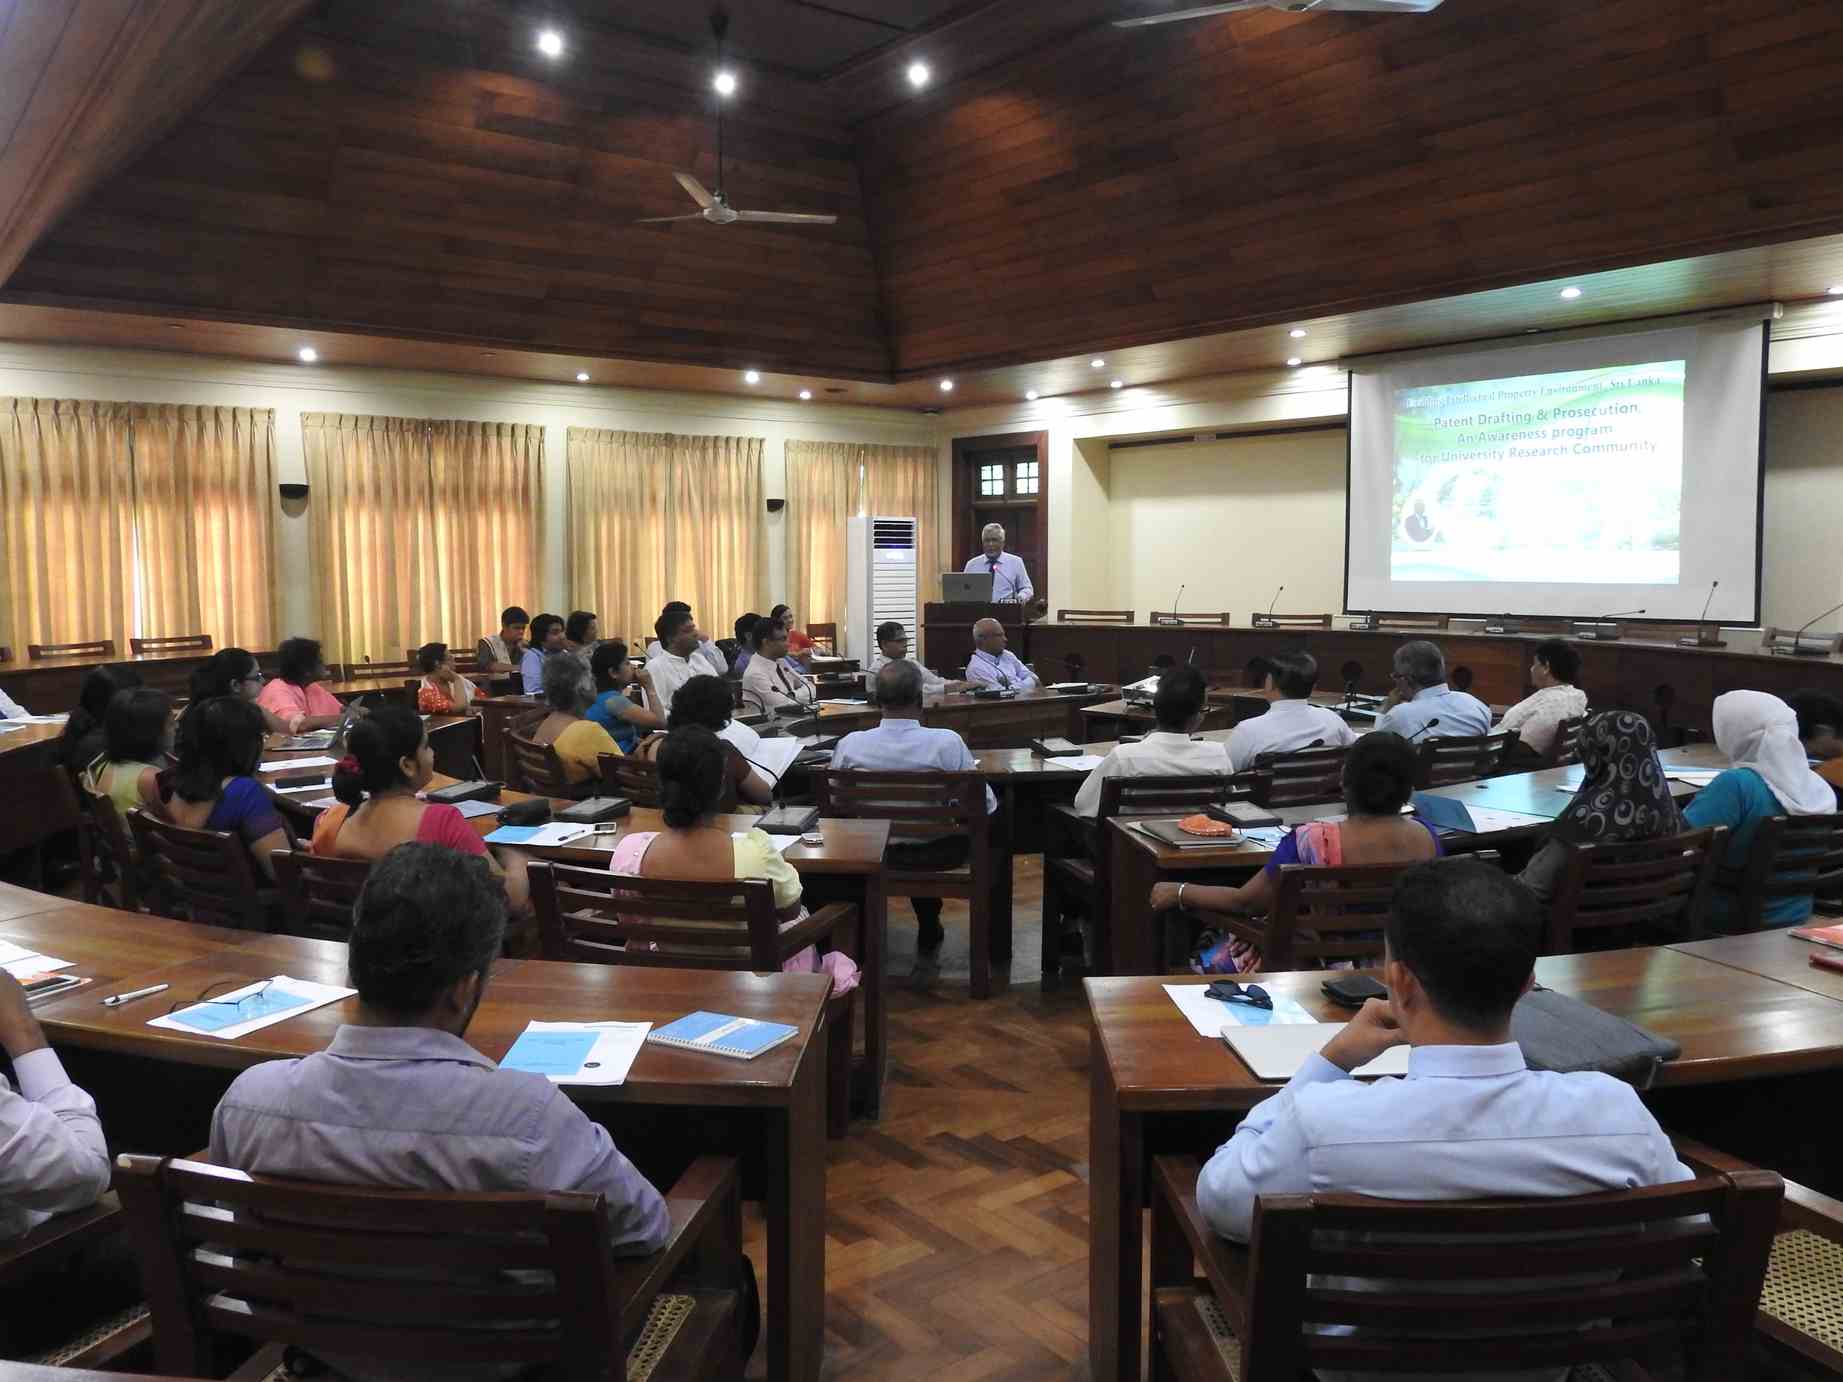 A workshop on Patent Drafting & Prosecution – An Awareness Program for University Research Community